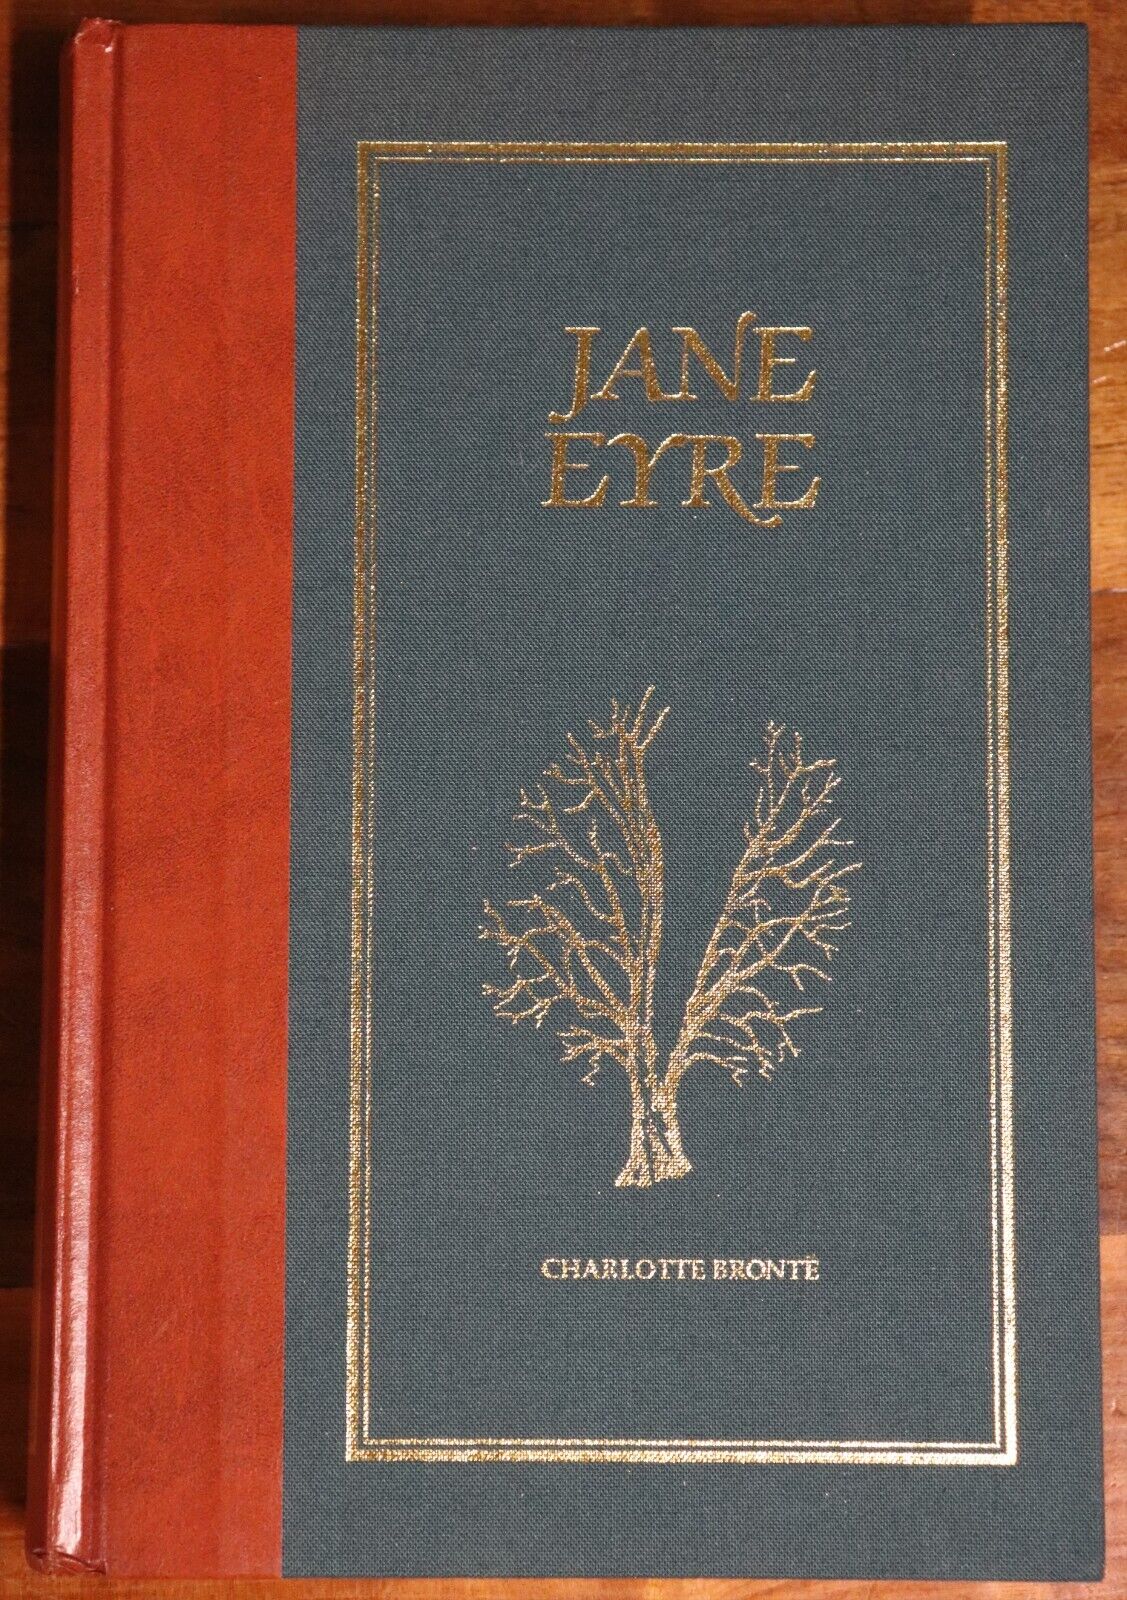 Jane Eyre by Charlotte Bronte - 2000 - Readers Digest Classic Literature Book - 0